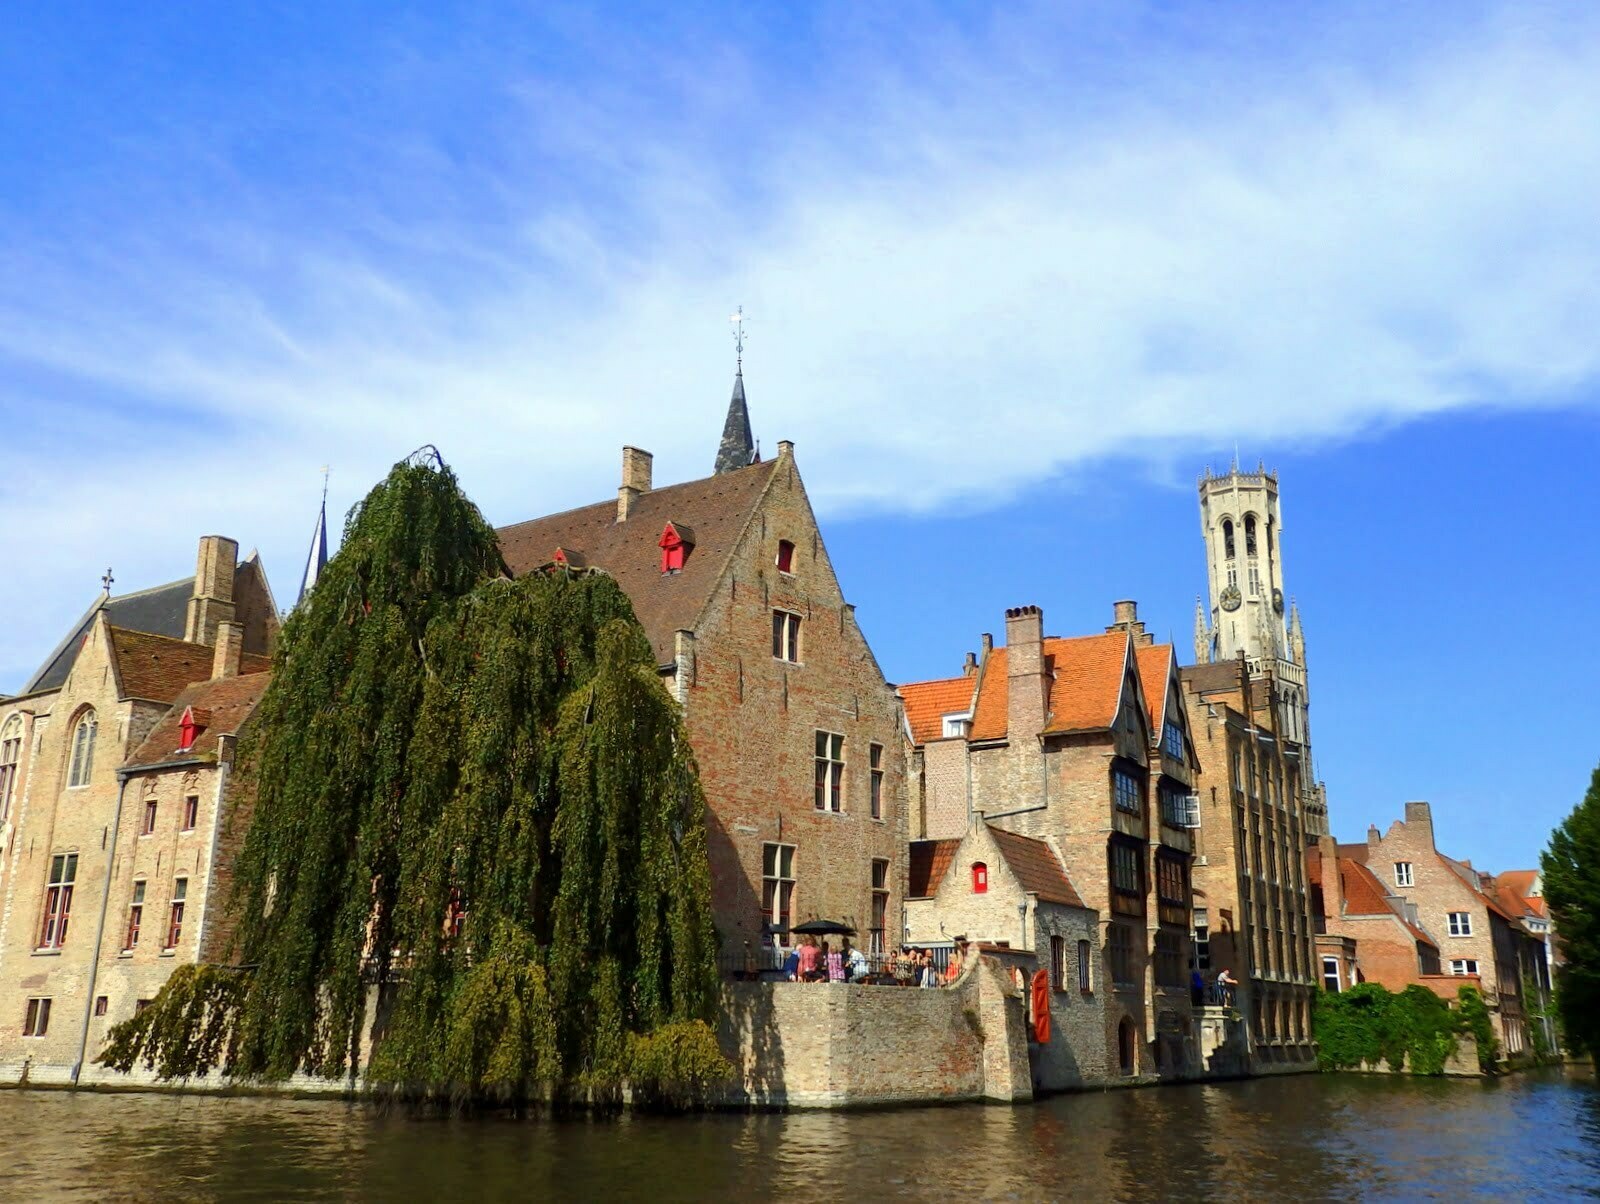 Call girl in Bruges